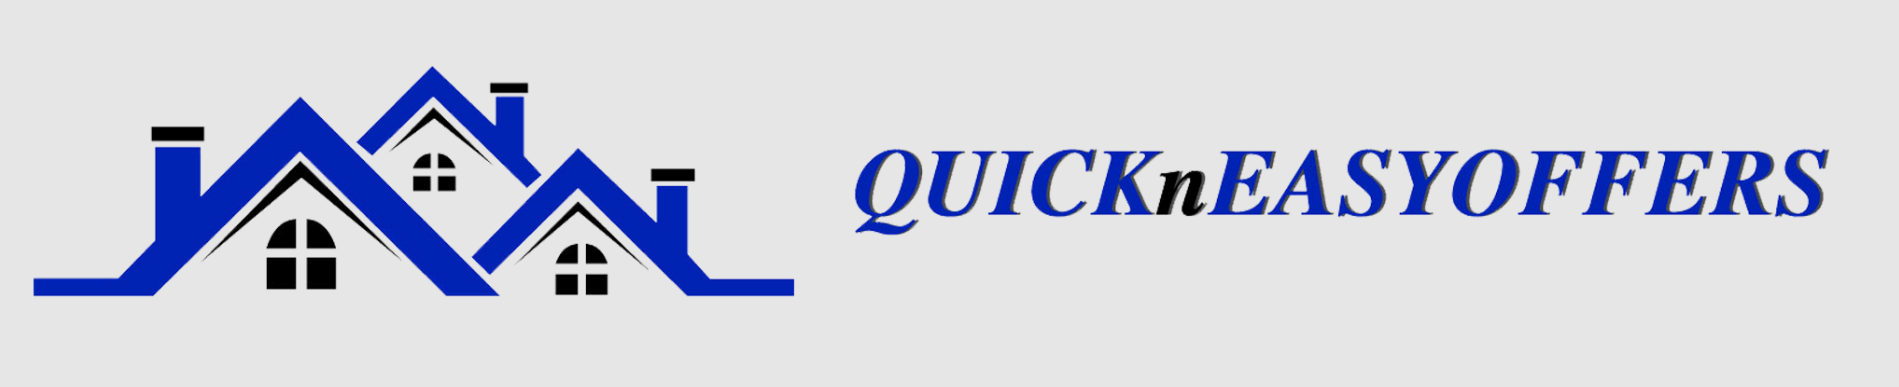 Quick n Easy Offers Logo